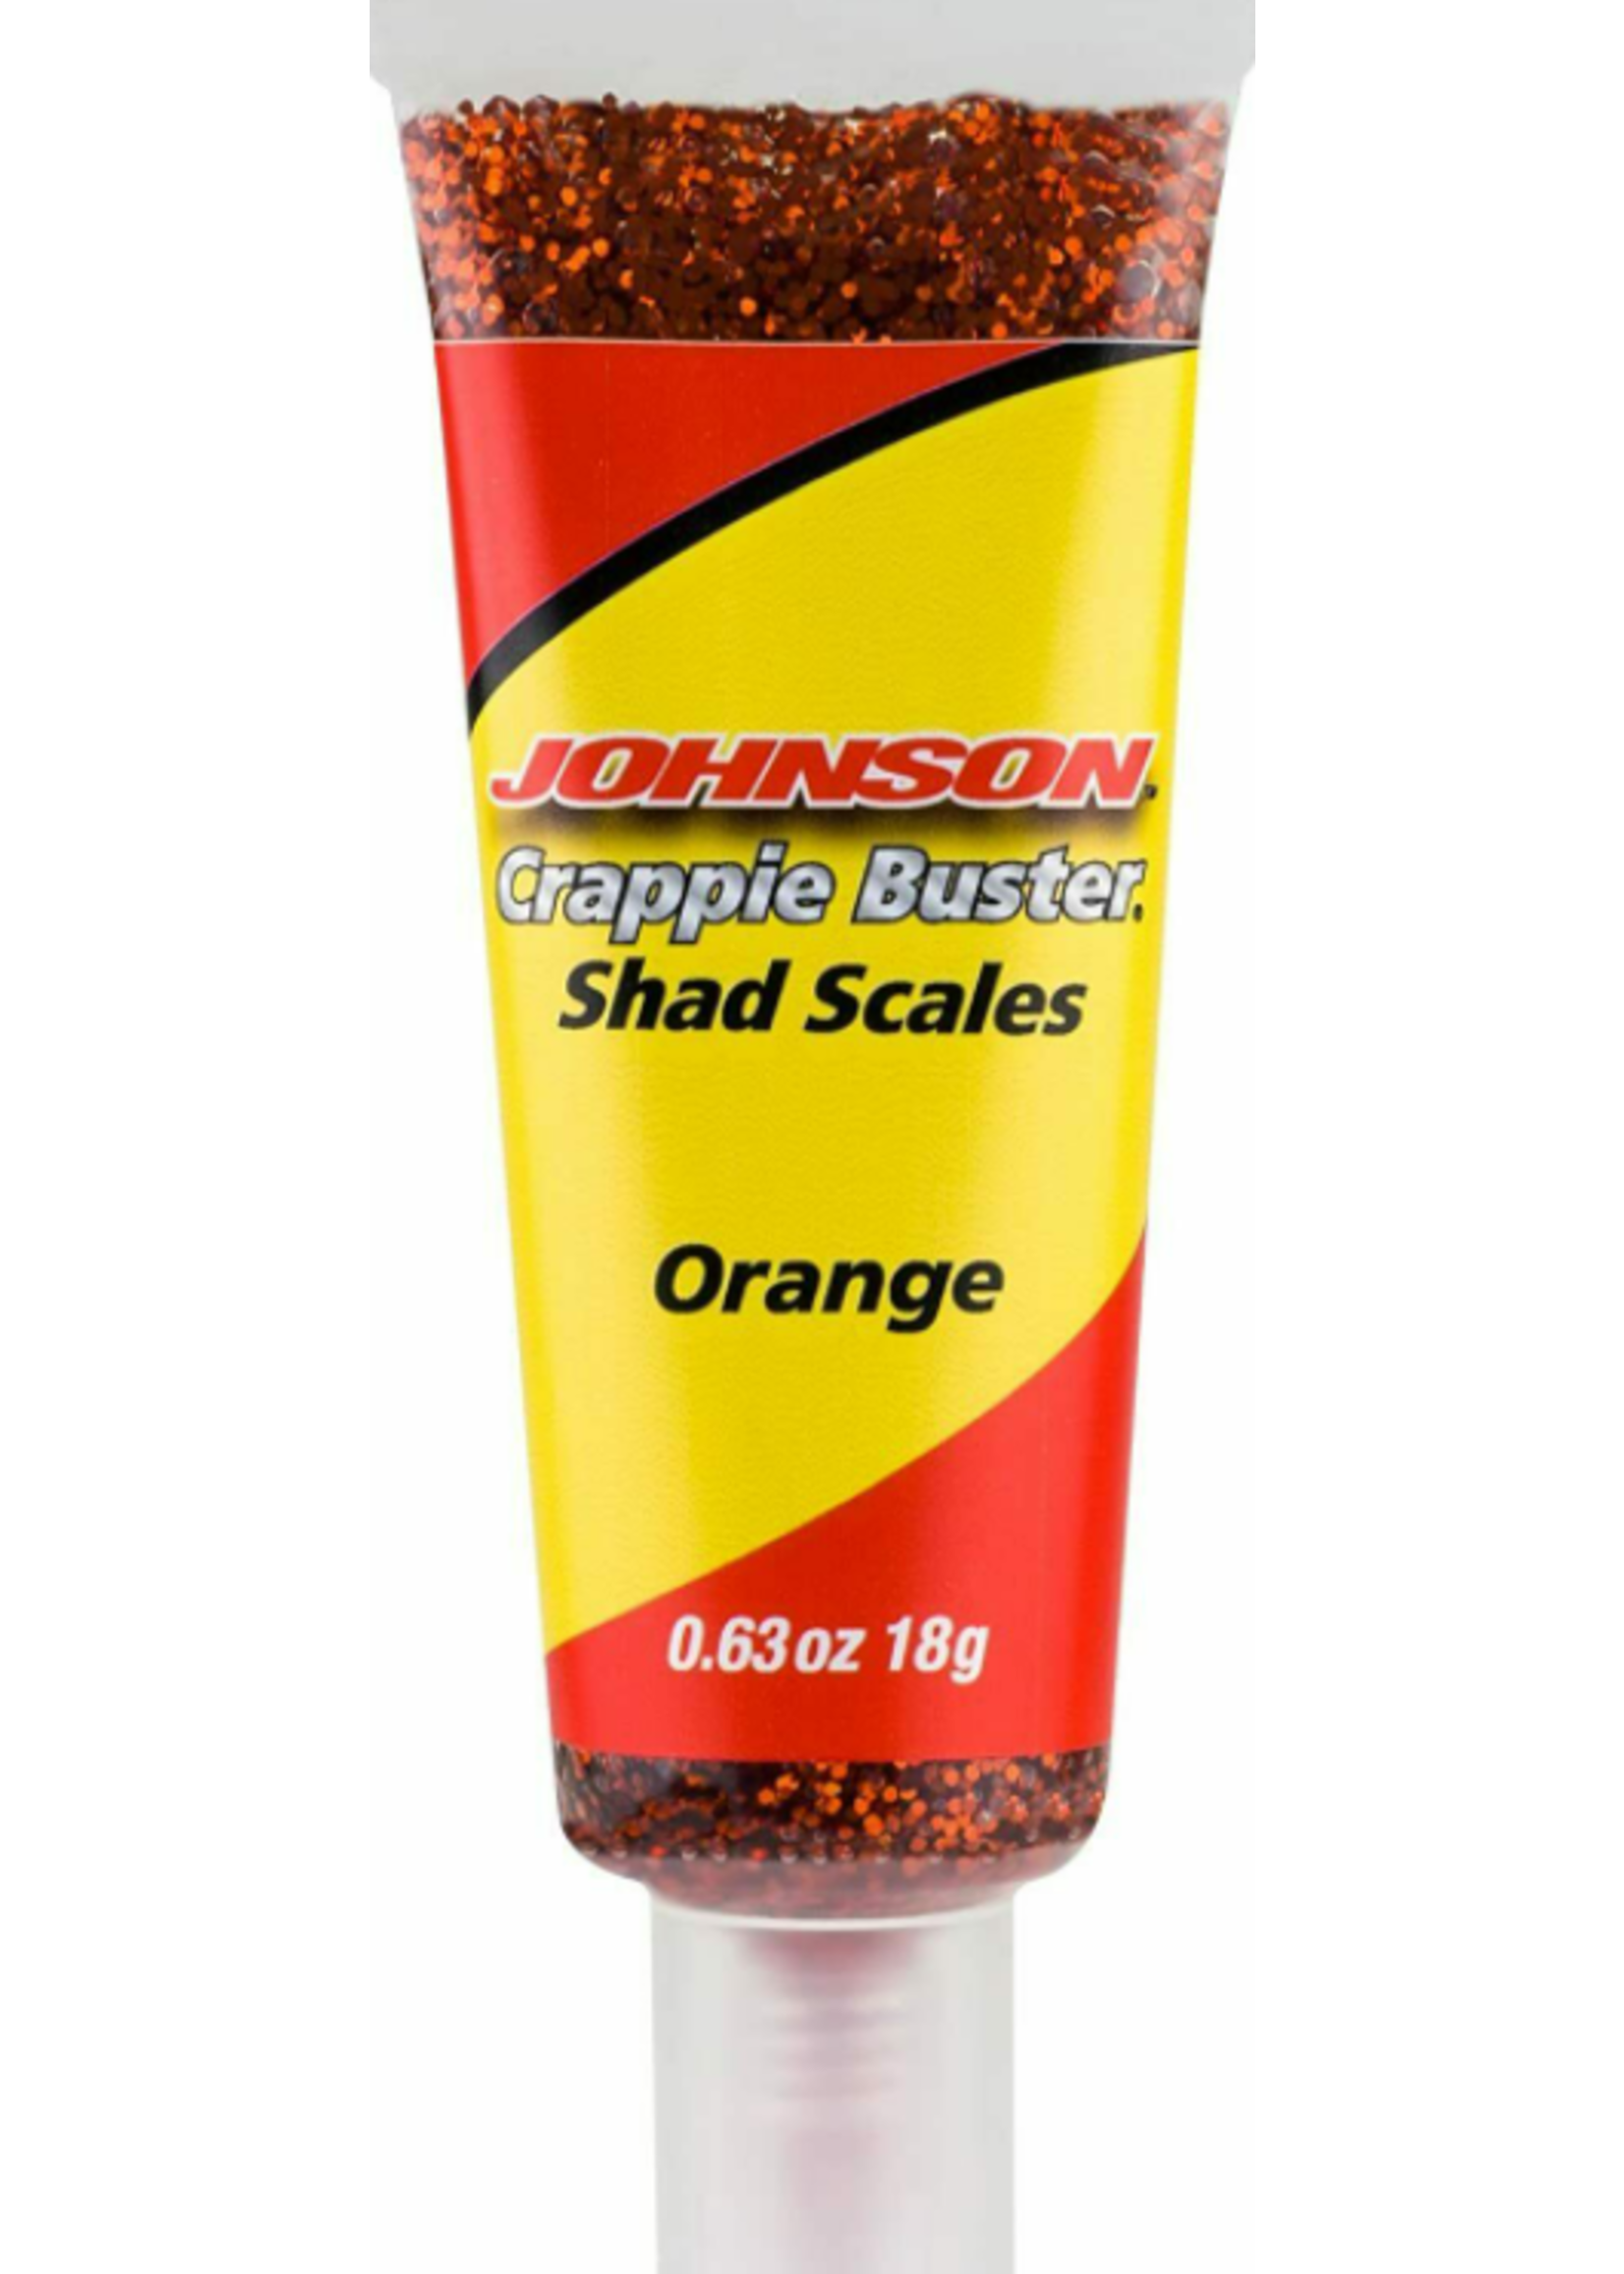 Johnson Crappie Buster Shad Scales - Orange